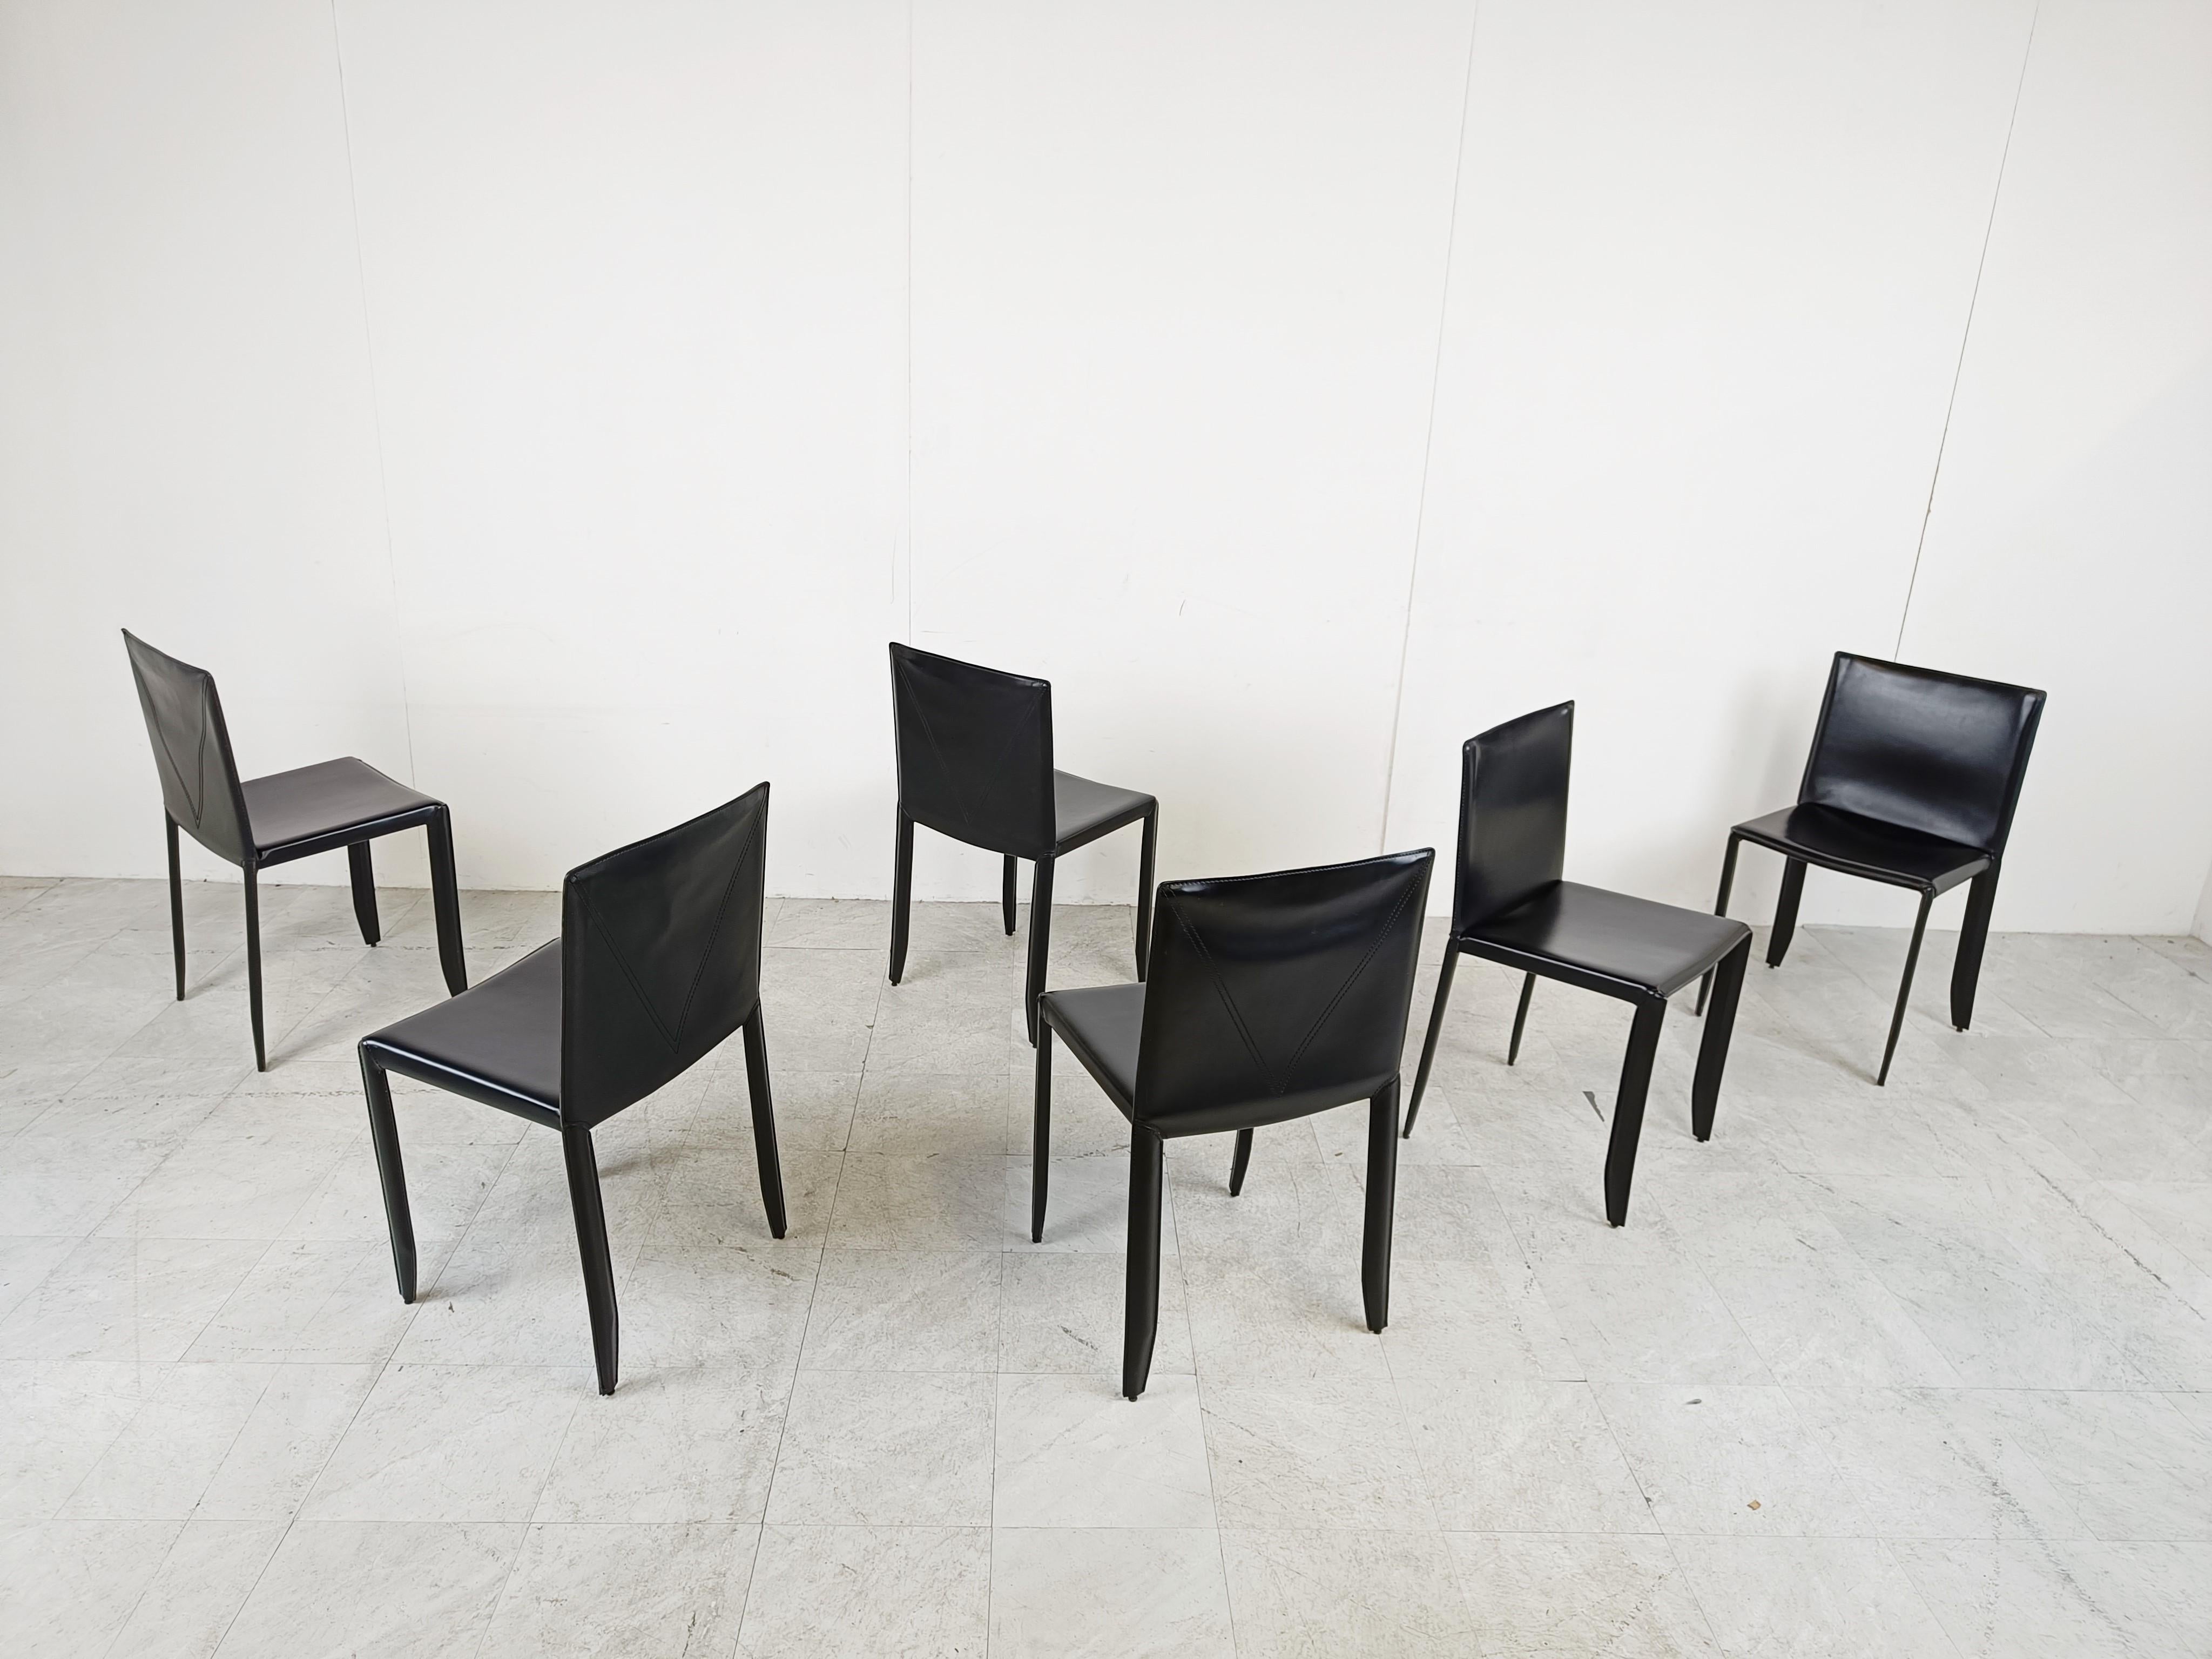 Black Leather Dining Chairs by Cattelan Italy, Set of 6 - 1980s For Sale 2